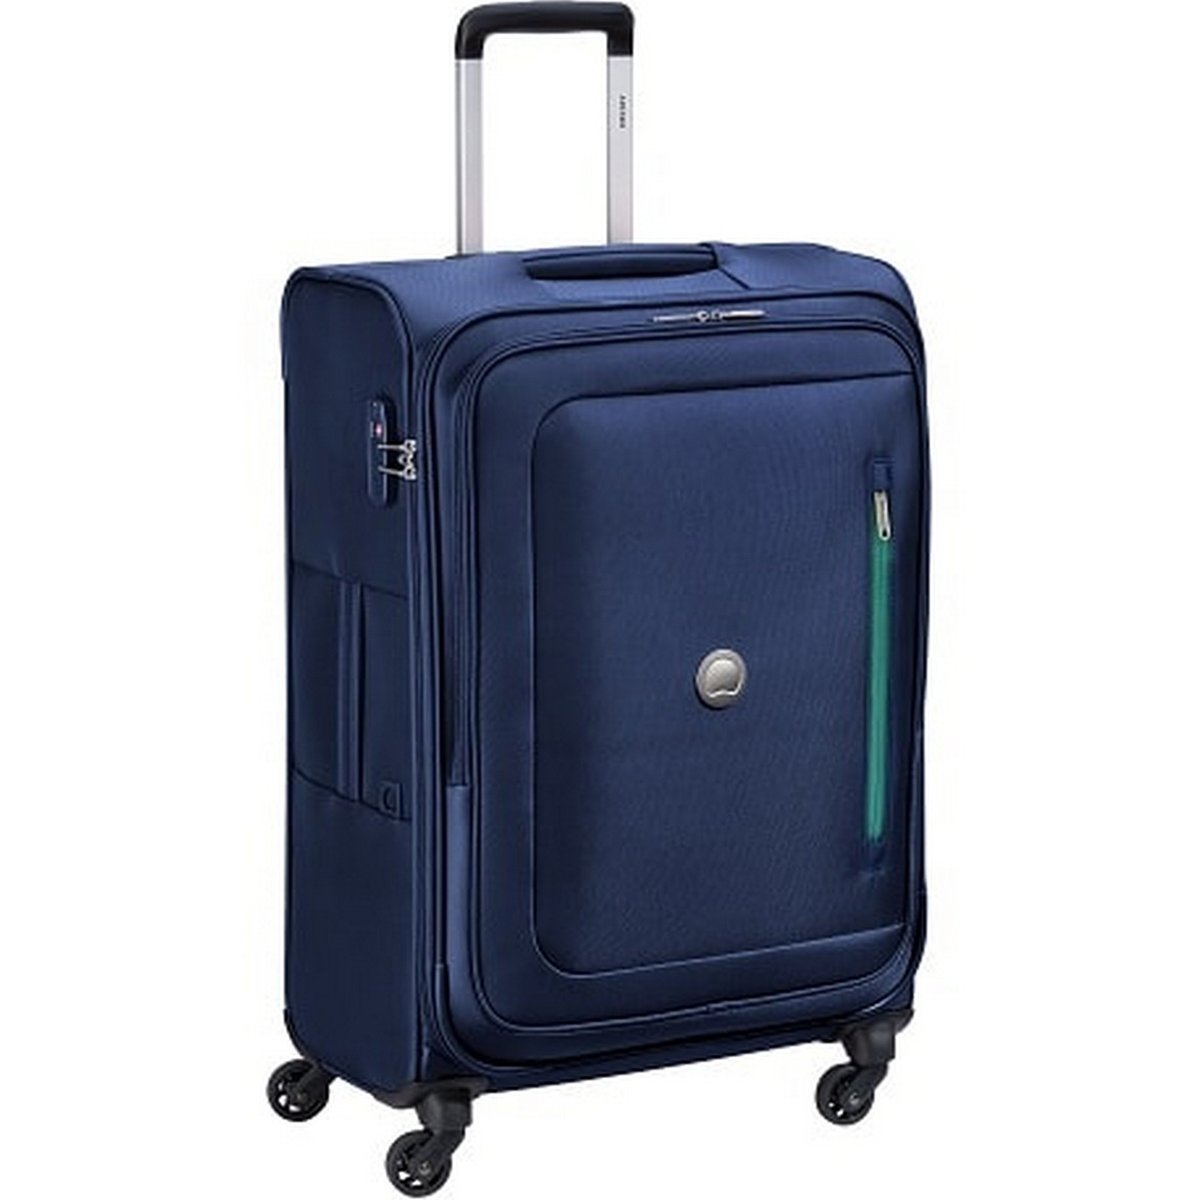 Delsey Oural 4 Wheel Soft Trolley 61cm Blue